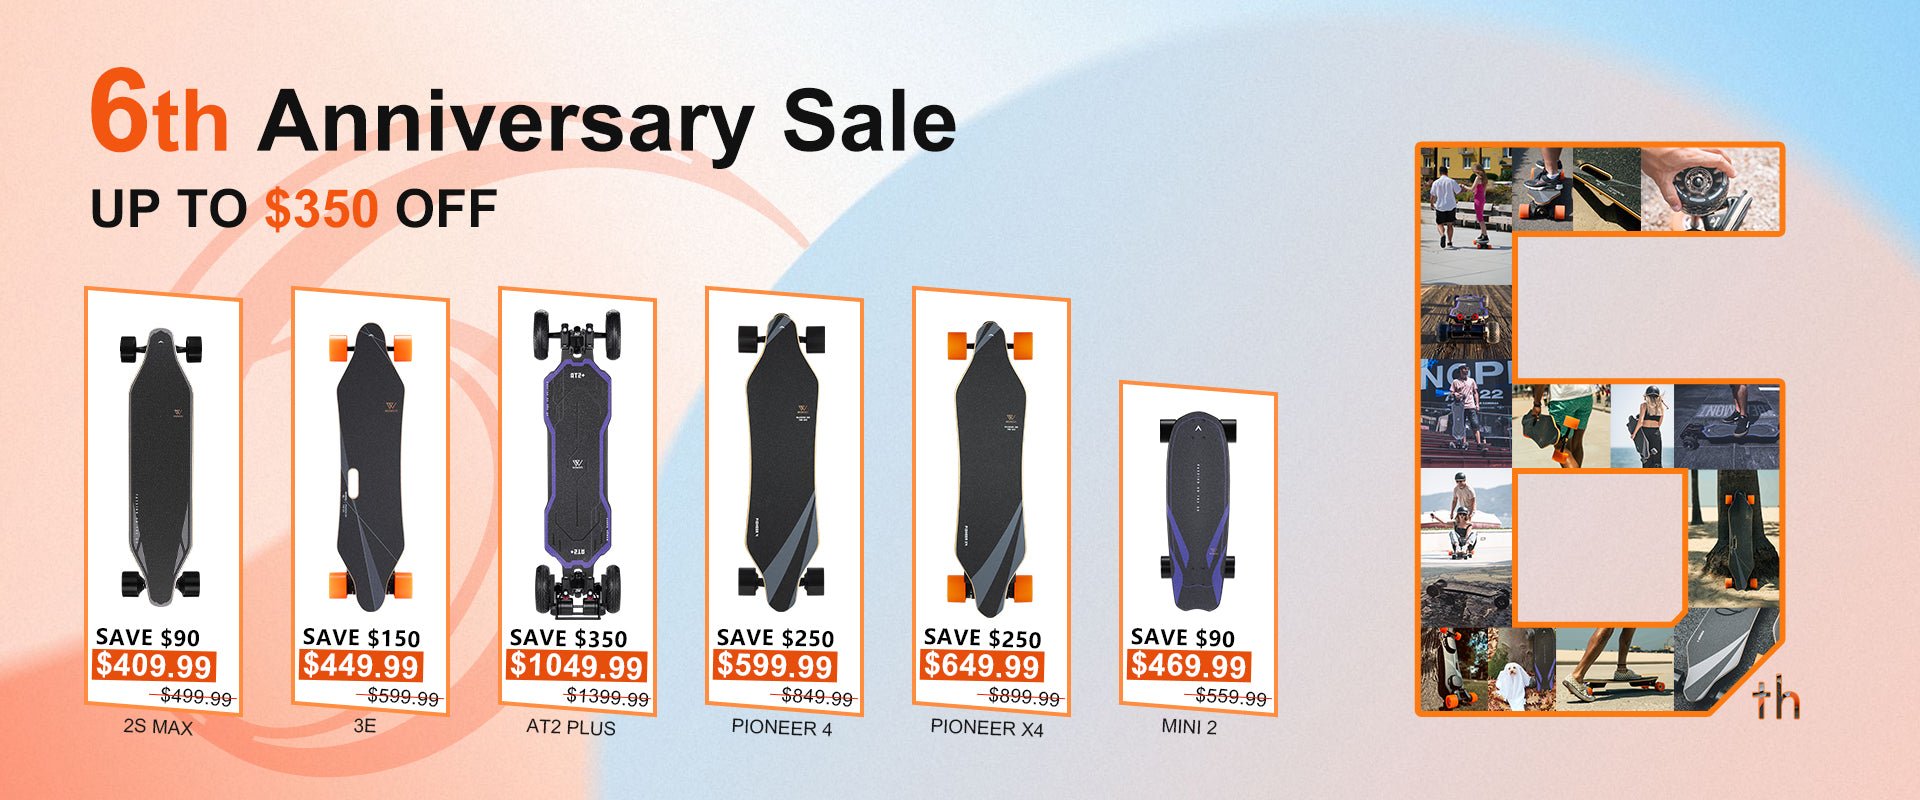 WowGo 6th Anniversary Sale - Best Time to Buy of the Year! - WOWGO BOARD